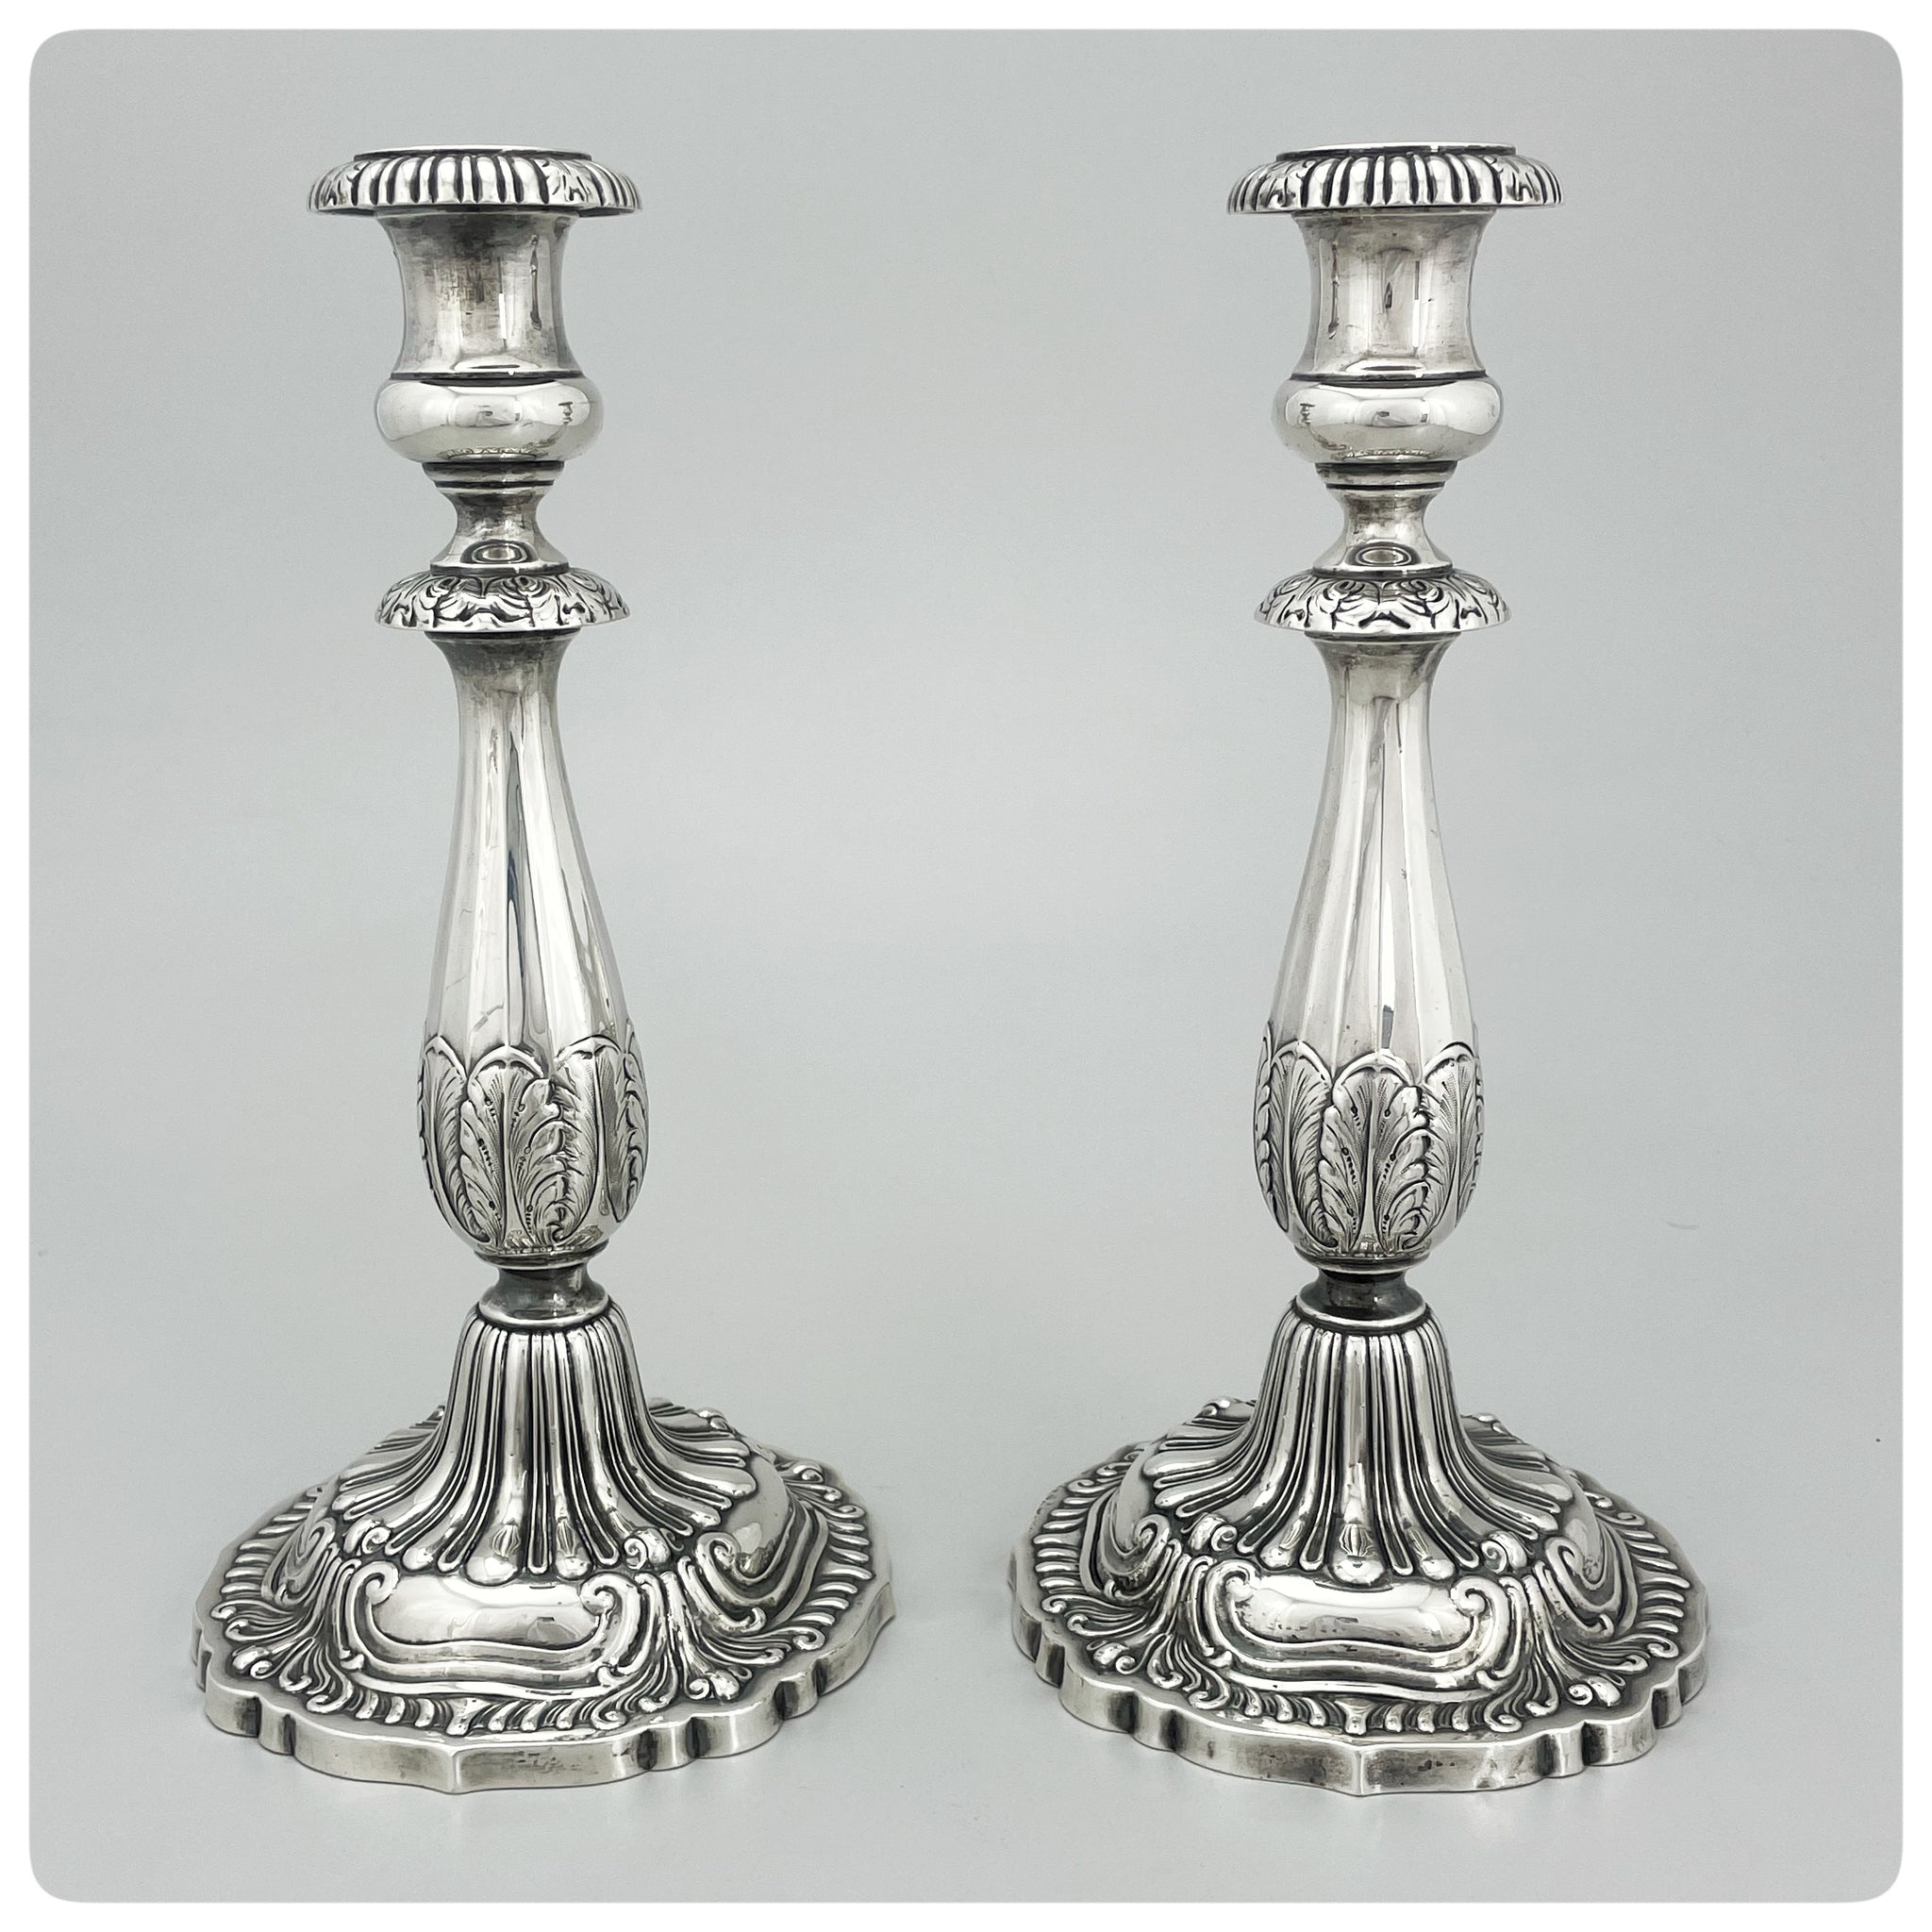 Sterling Silver Pair of Candlesticks with Acanthus Leaves and Gadrooning, M. Fred Hirsch Co., Jersey City, NJ, circa 1925